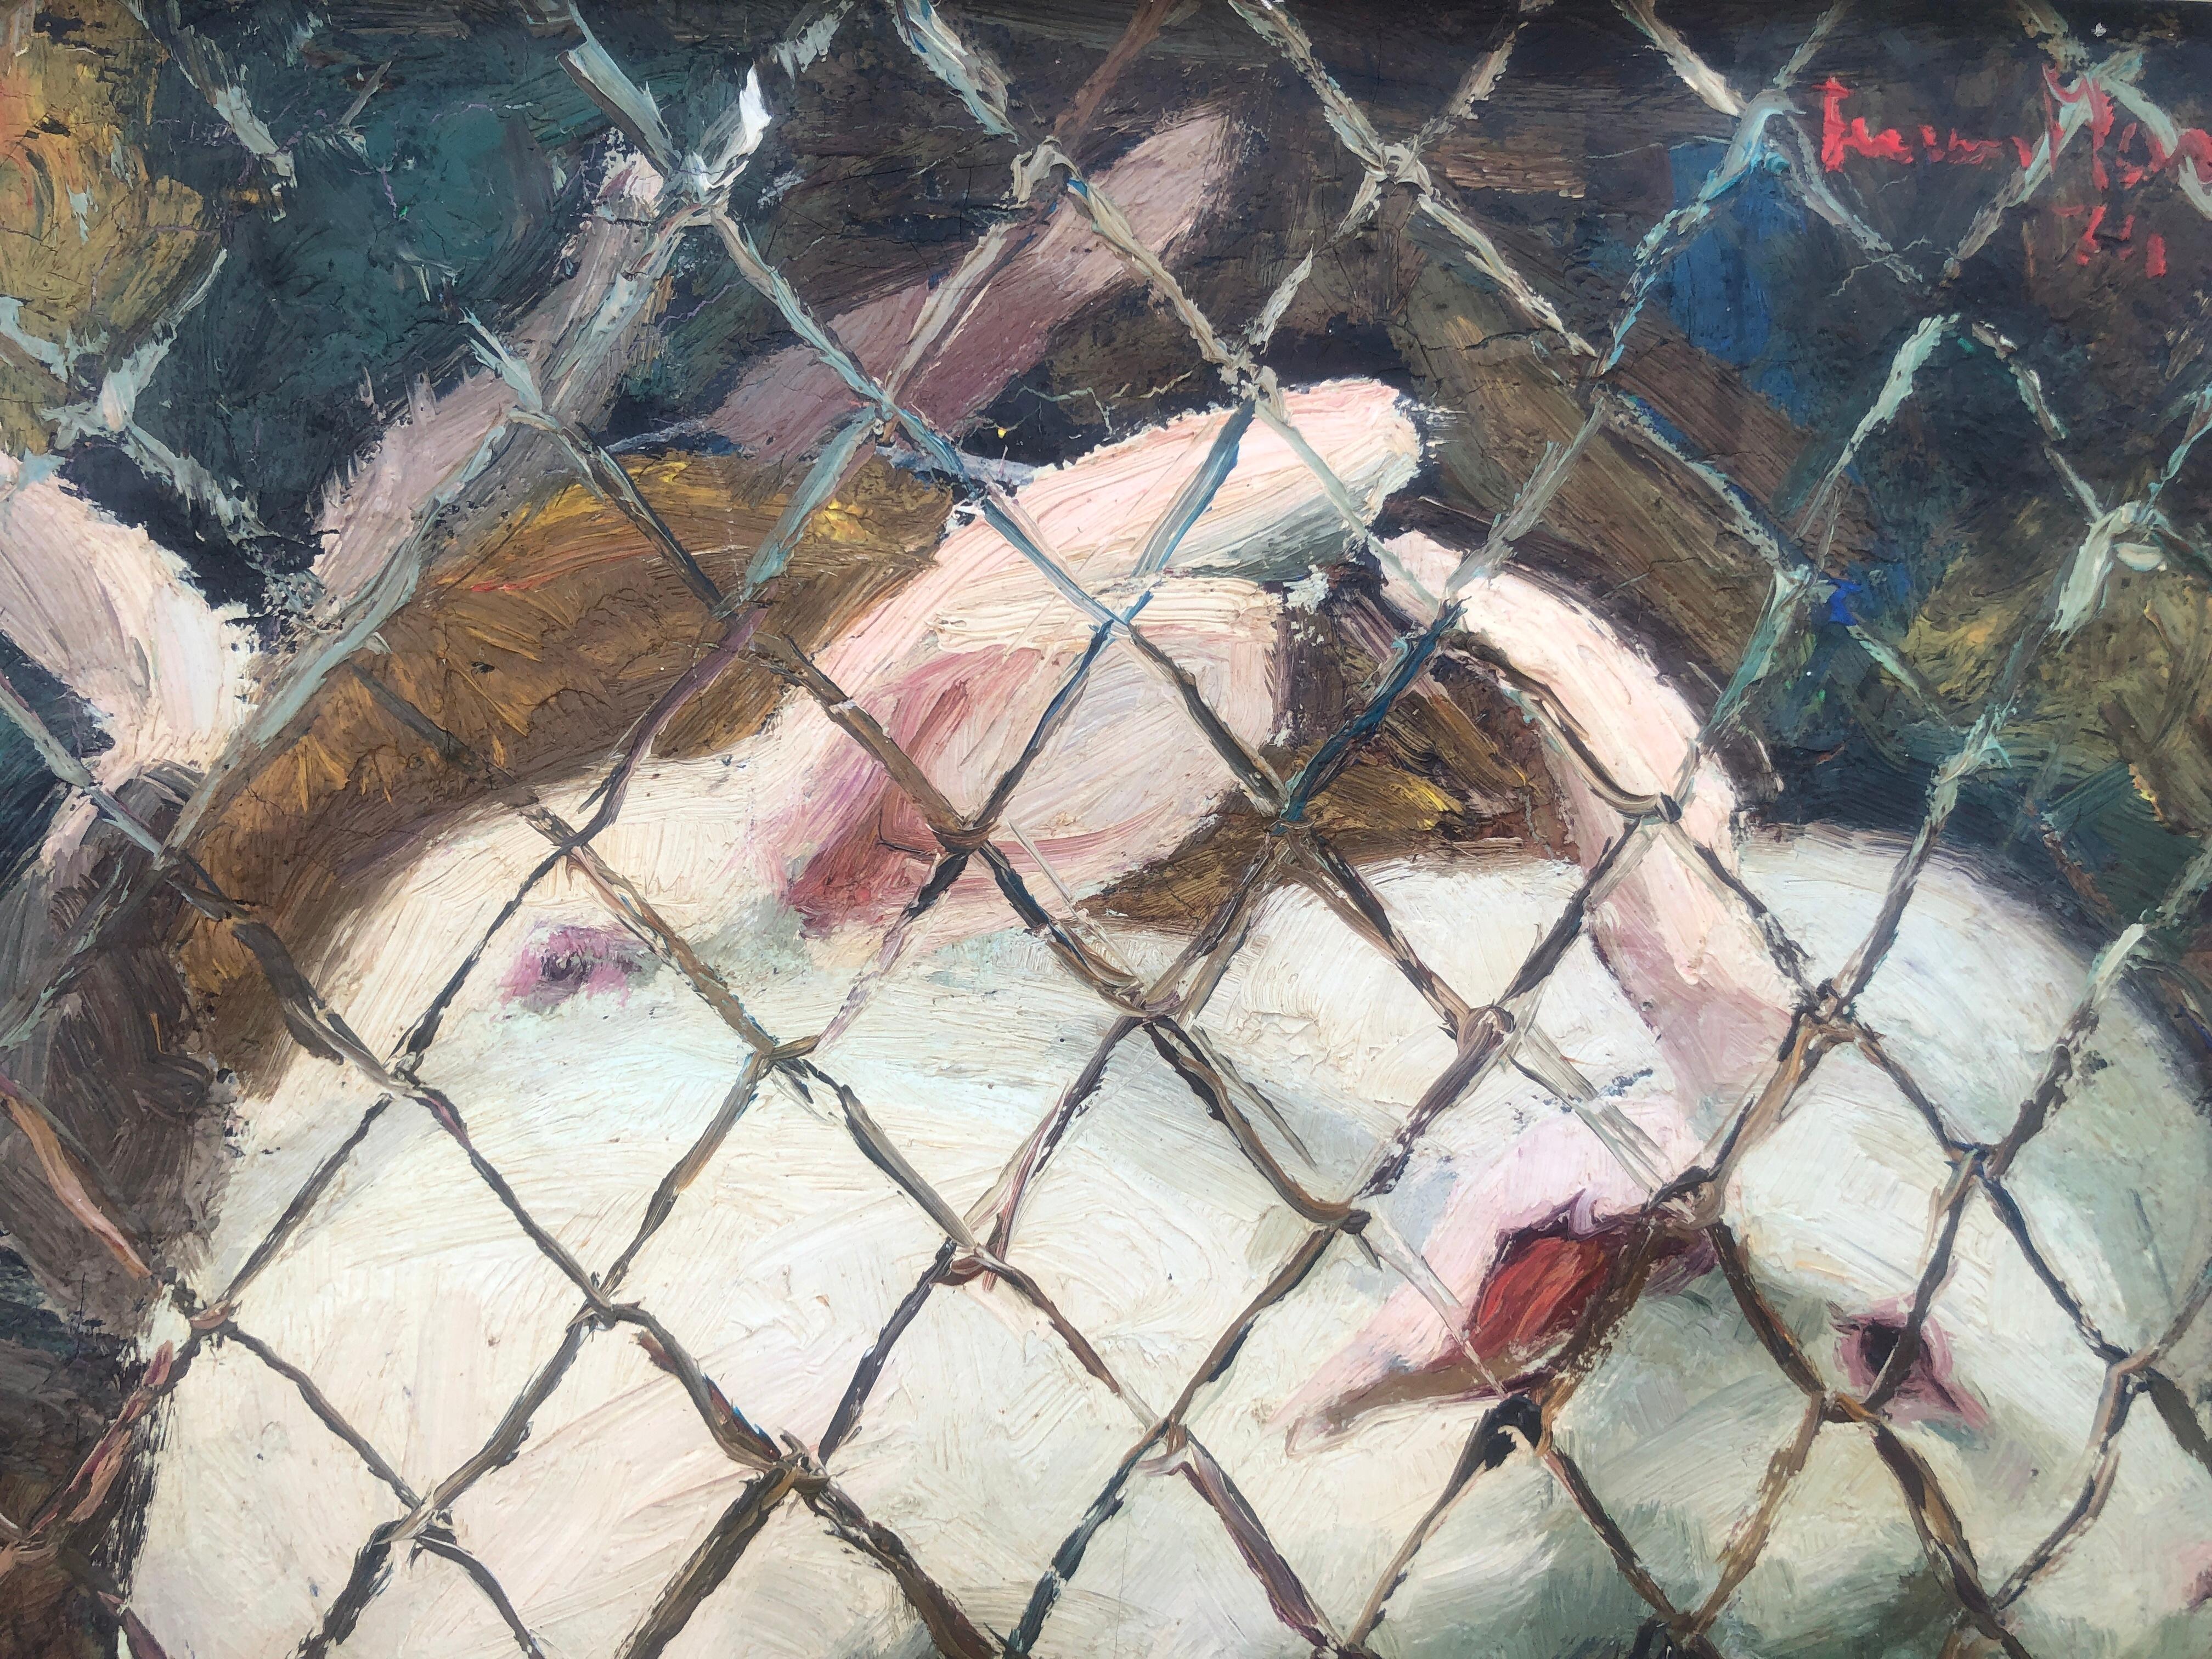 caged rabbits scene with animals oil on canvas painting - Gray Animal Painting by Ferran Marti